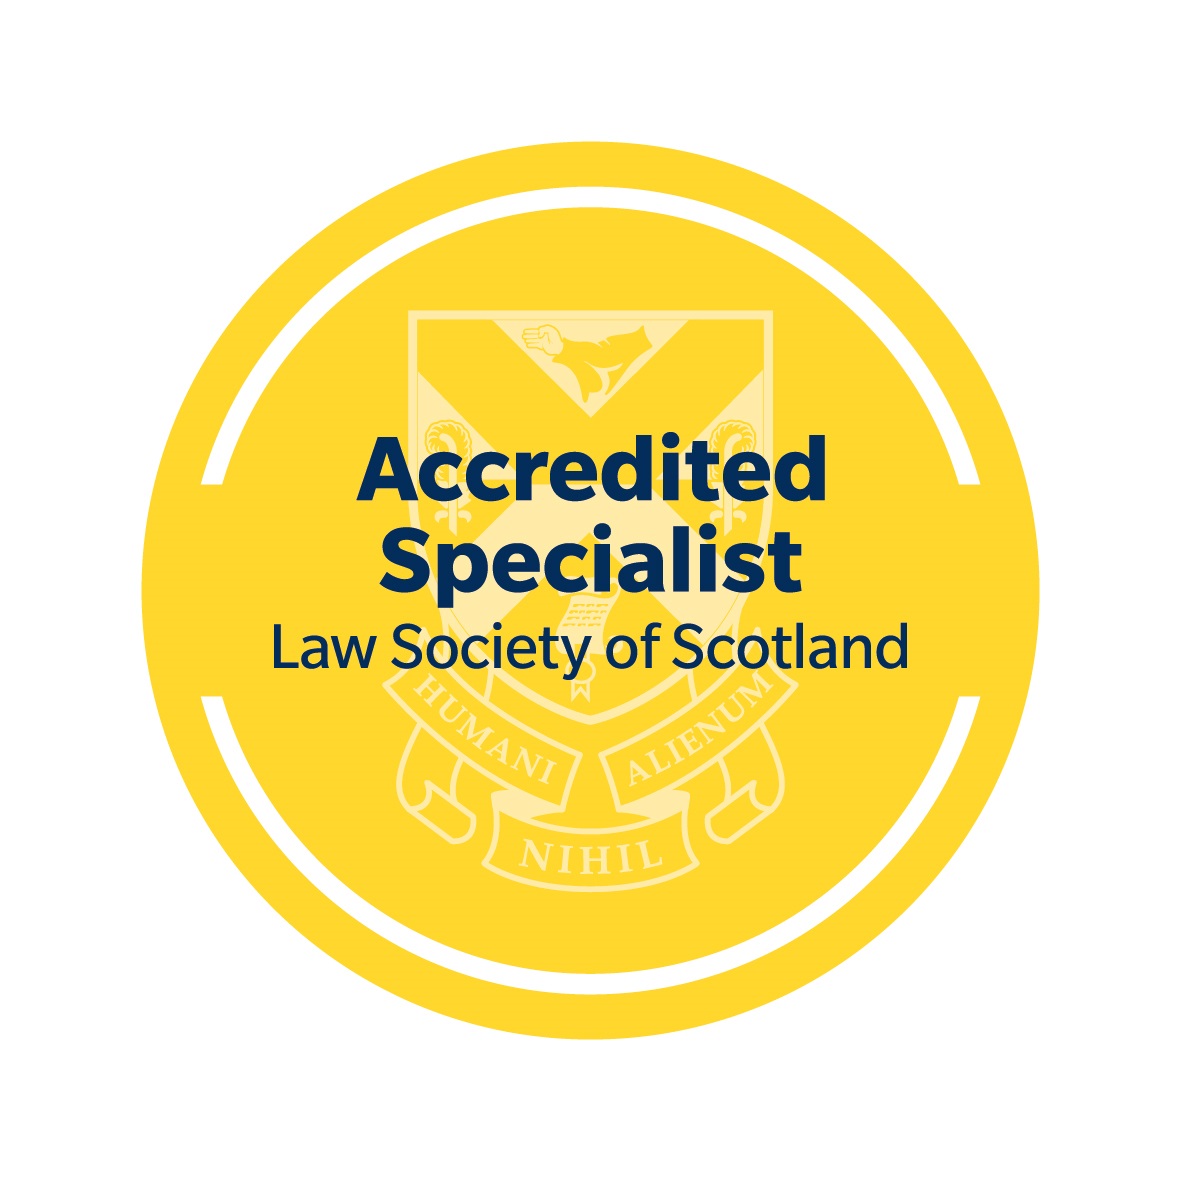 LS Accredited Specialist 300dpi 1